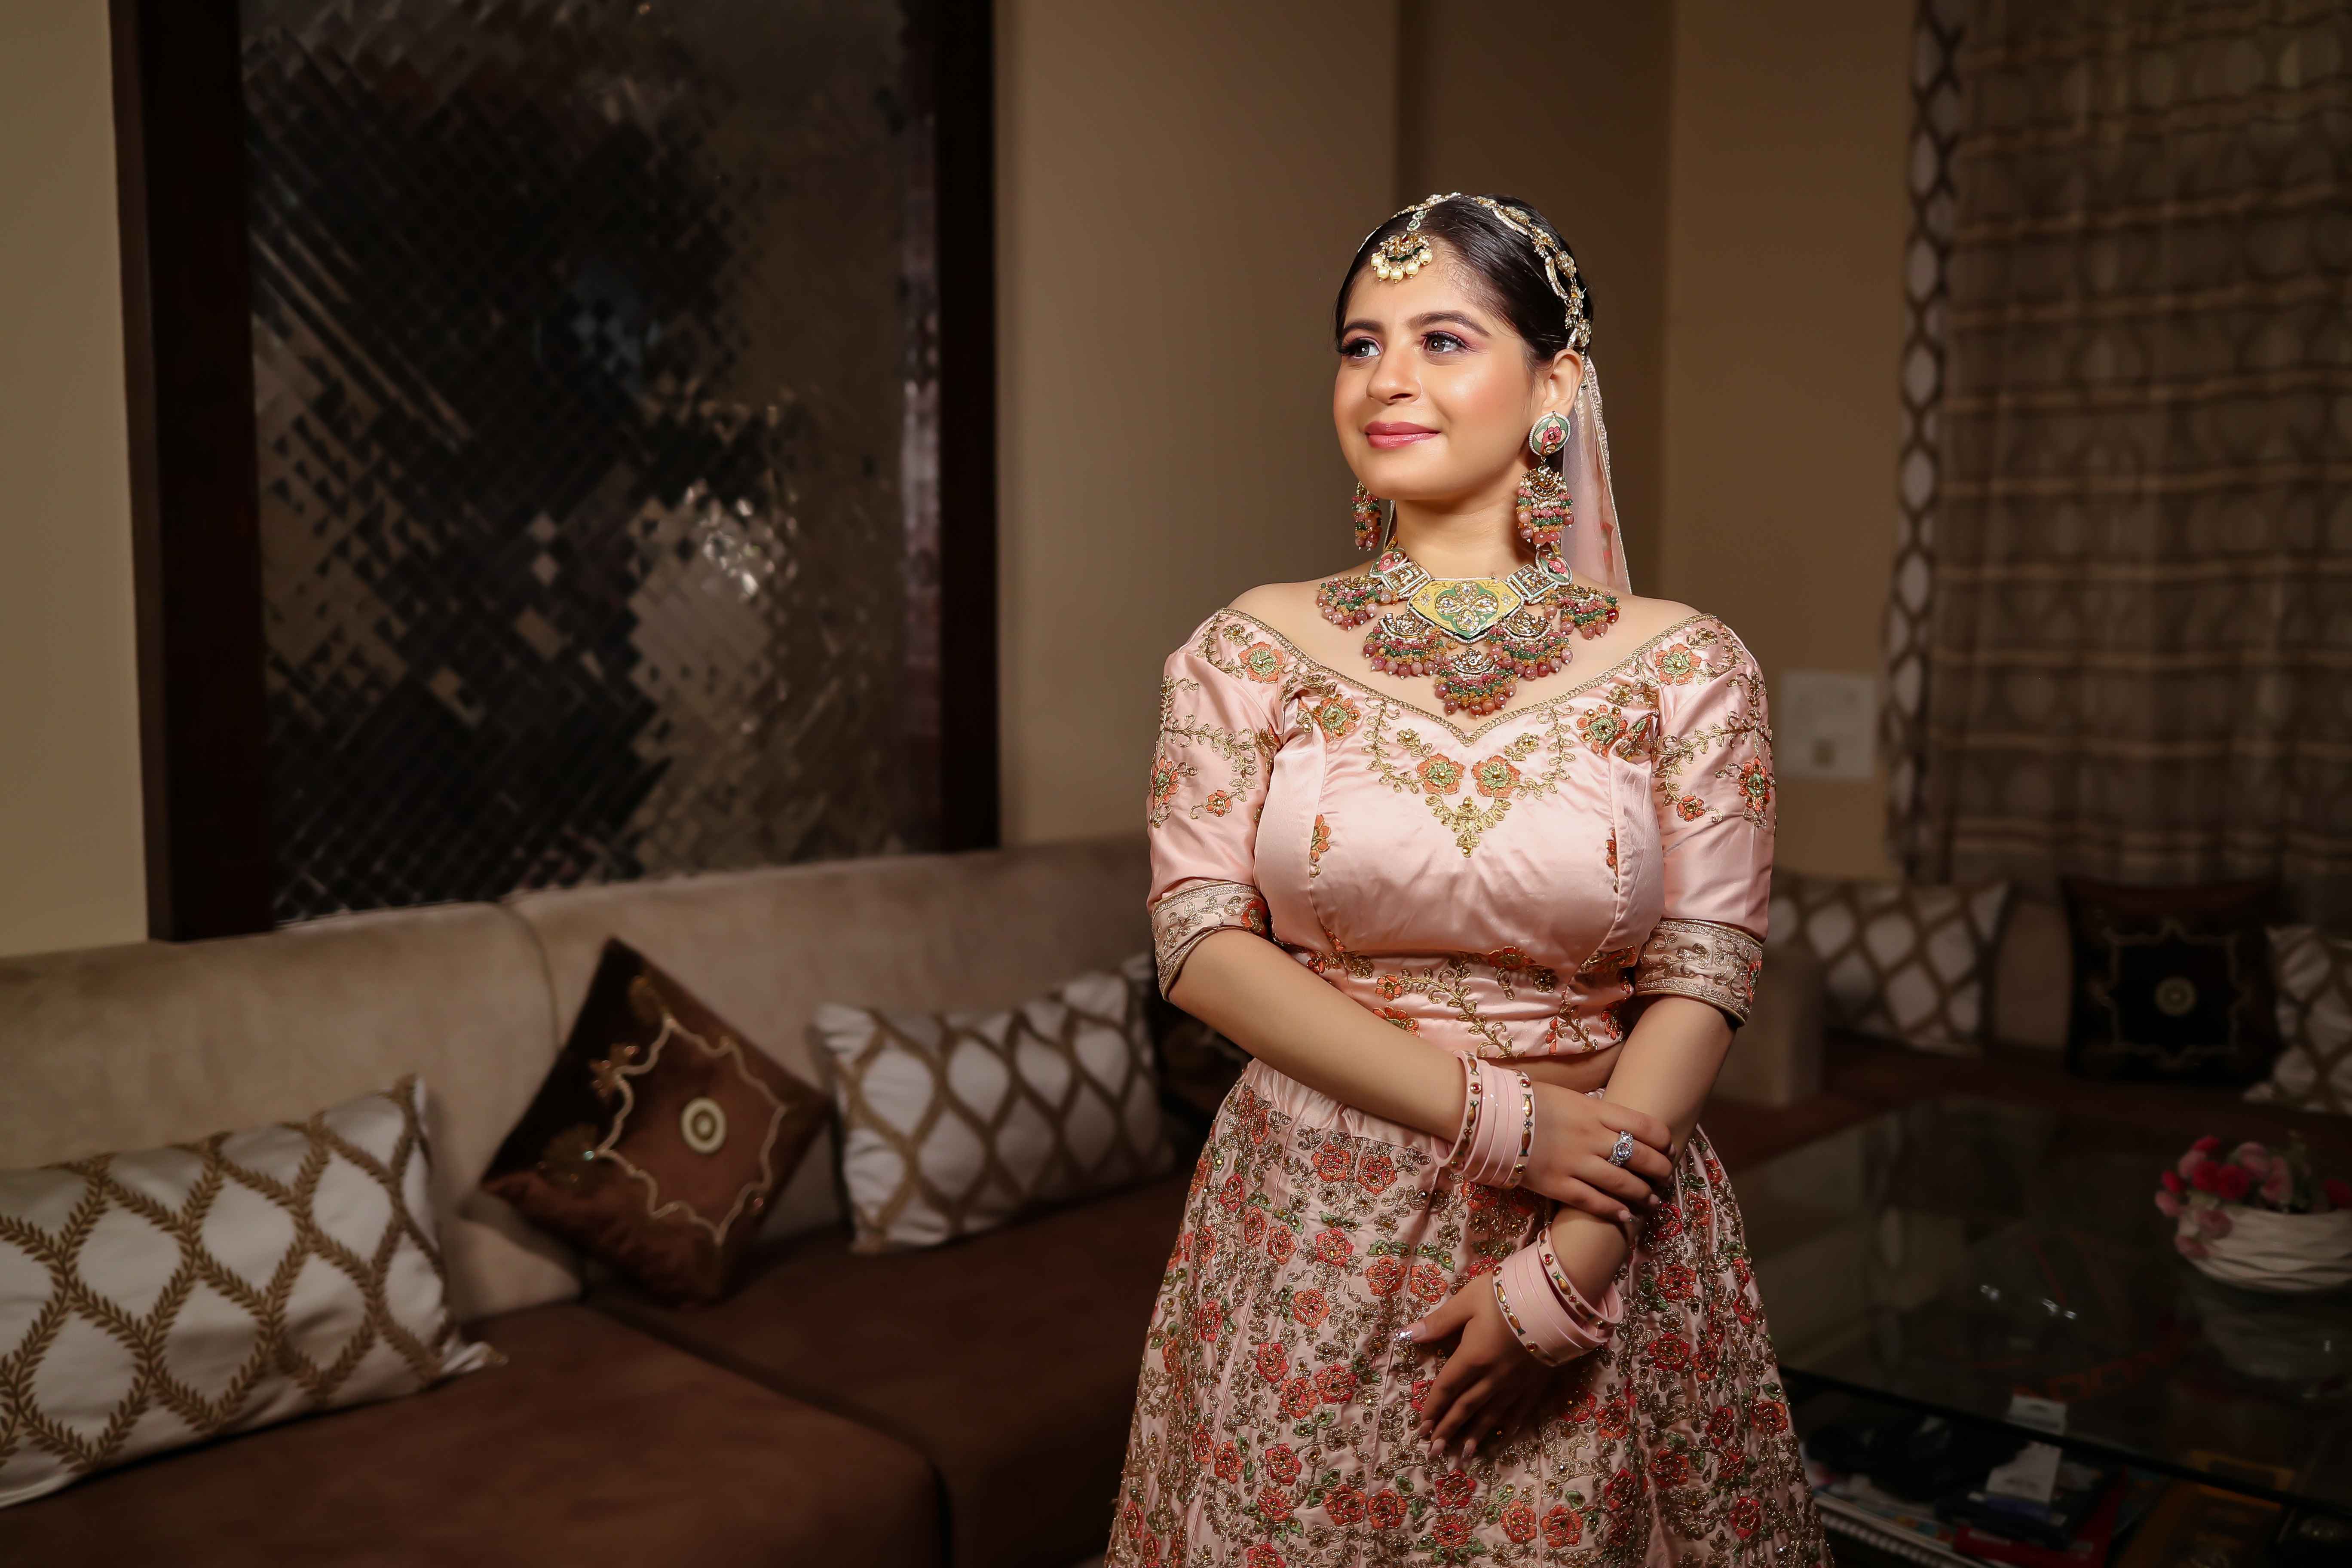 Top 10 Bridal Makeup Artists In Udaipur For Your Spectacular Look